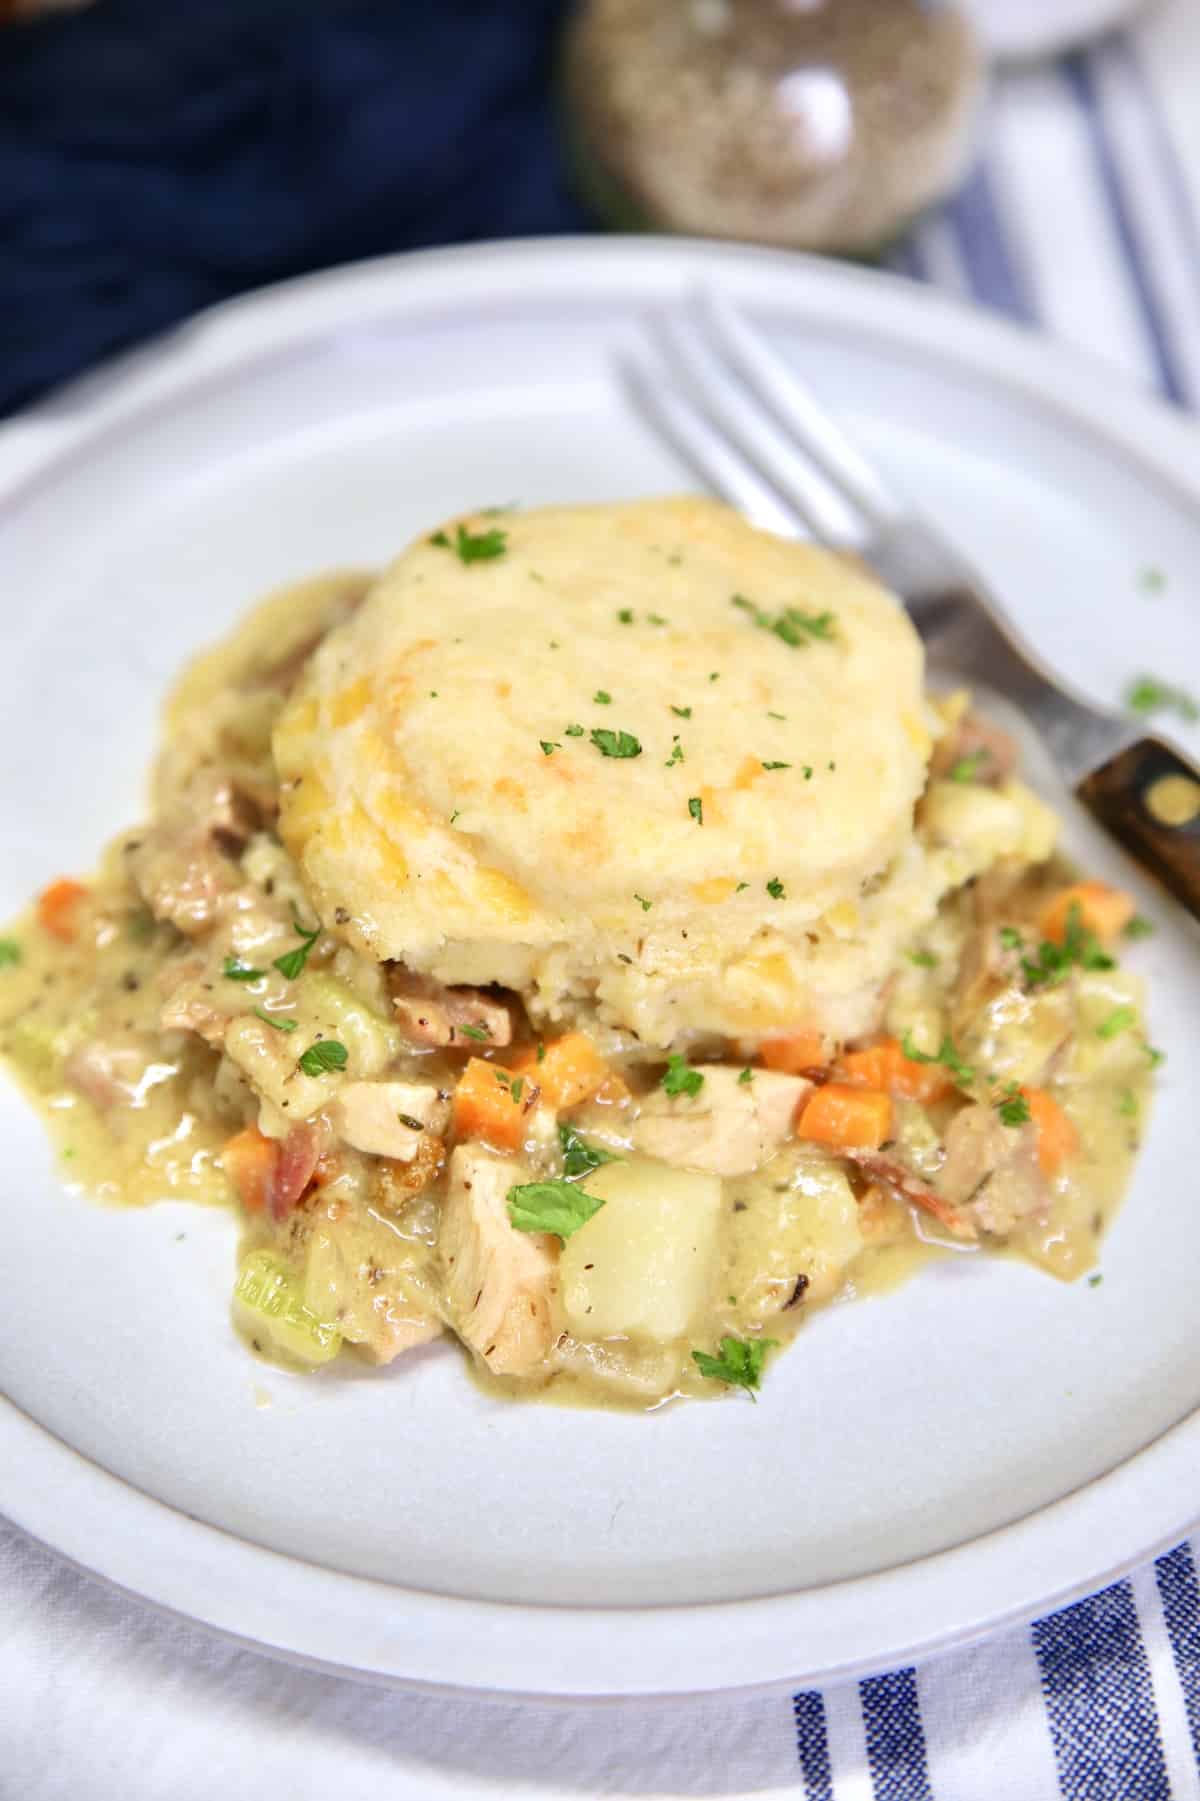 Chicken and biscuit casserole on a plate with a fork.